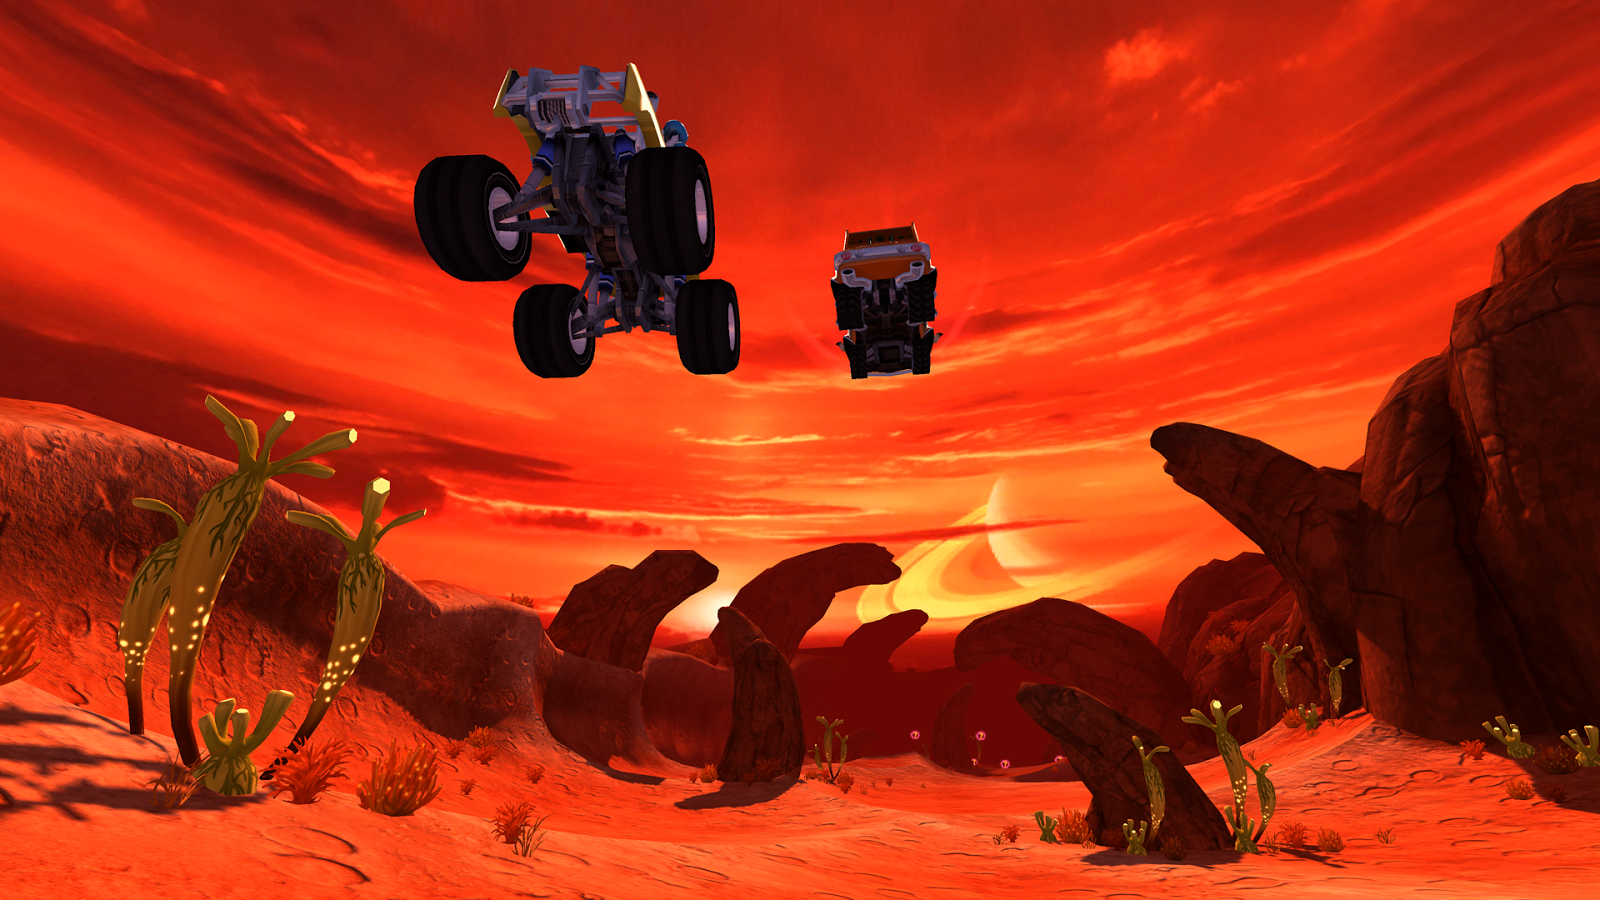 Beach Buggy Racing Android Apps On Google Play